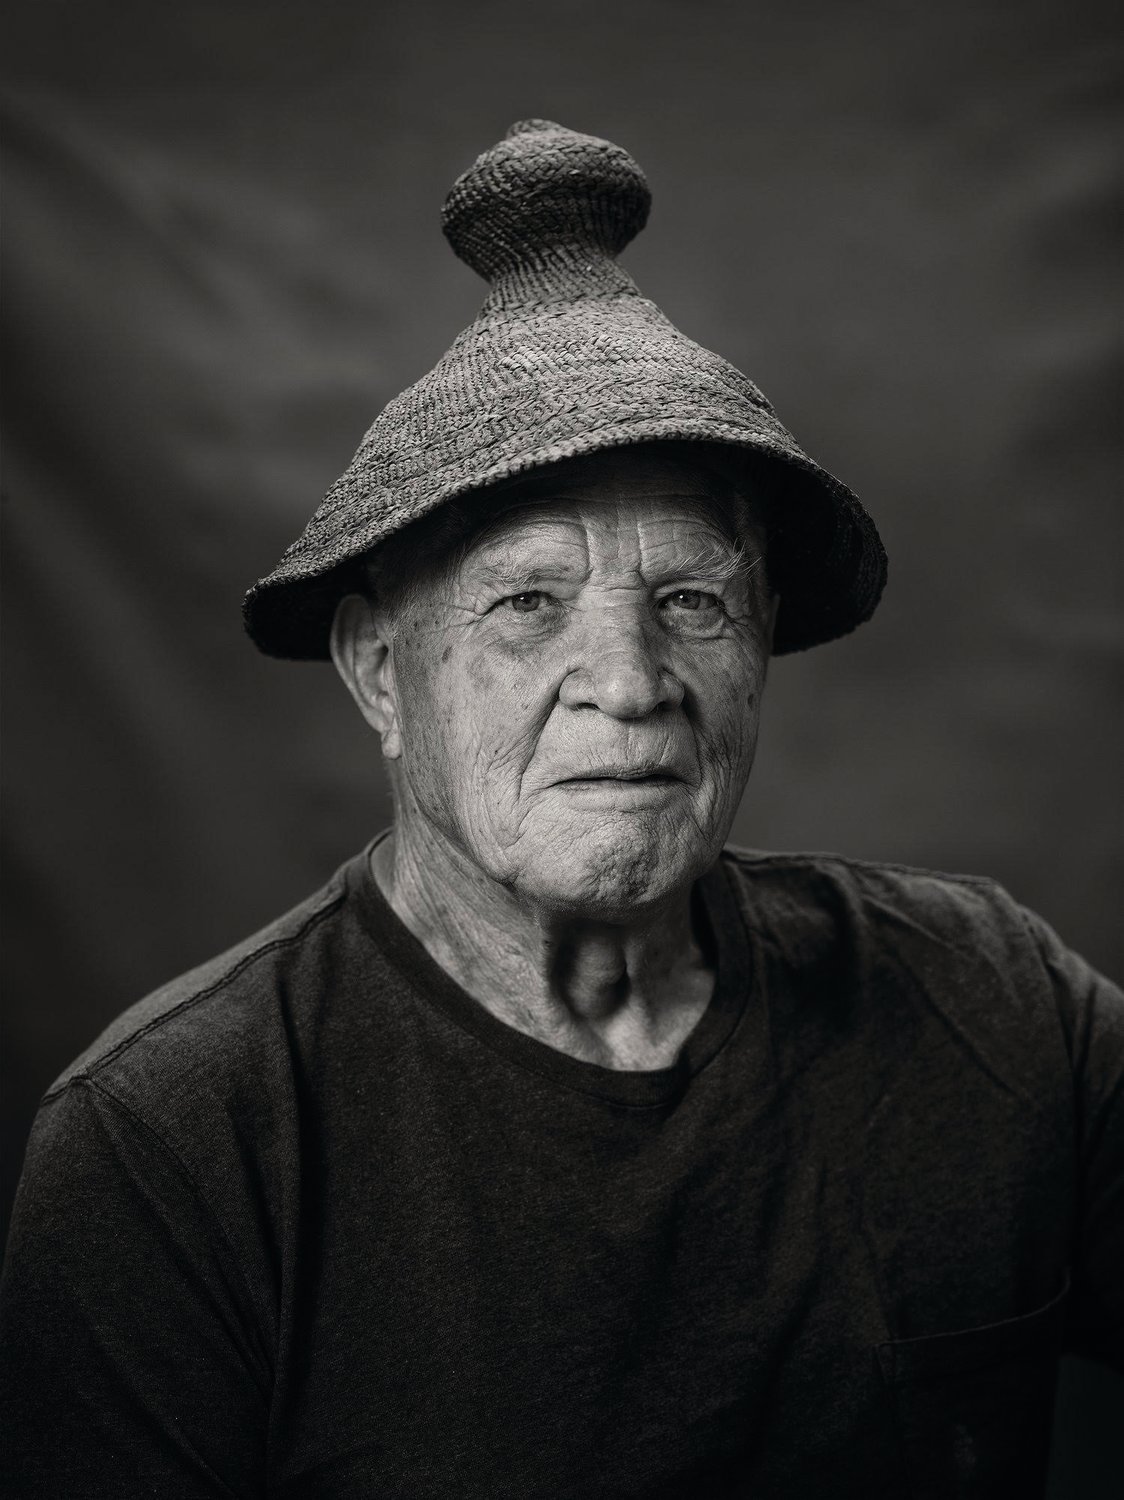 Powerful portraits transpose history and reparations in “Still Here” exhibit.